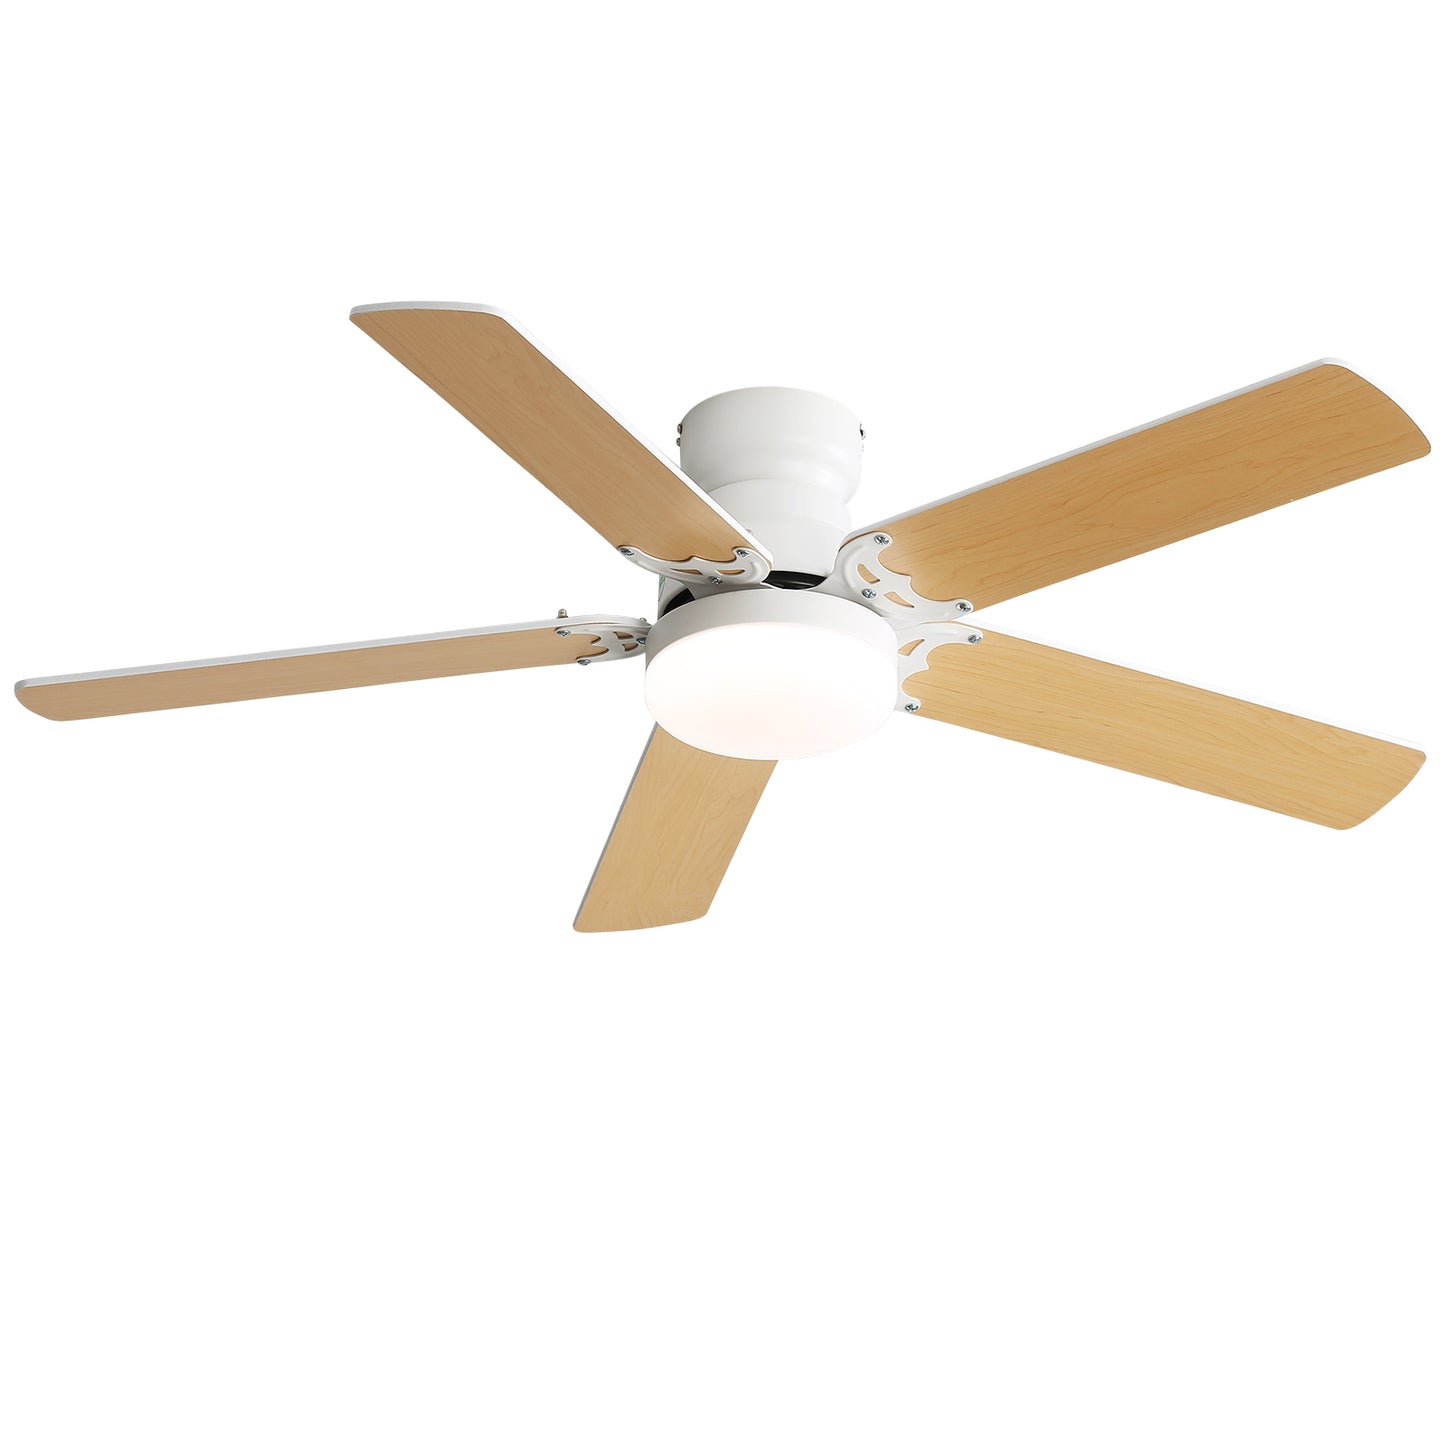 42-inch Energy Efficient White Ceiling Fan with Reversible DC Motor and LED Light